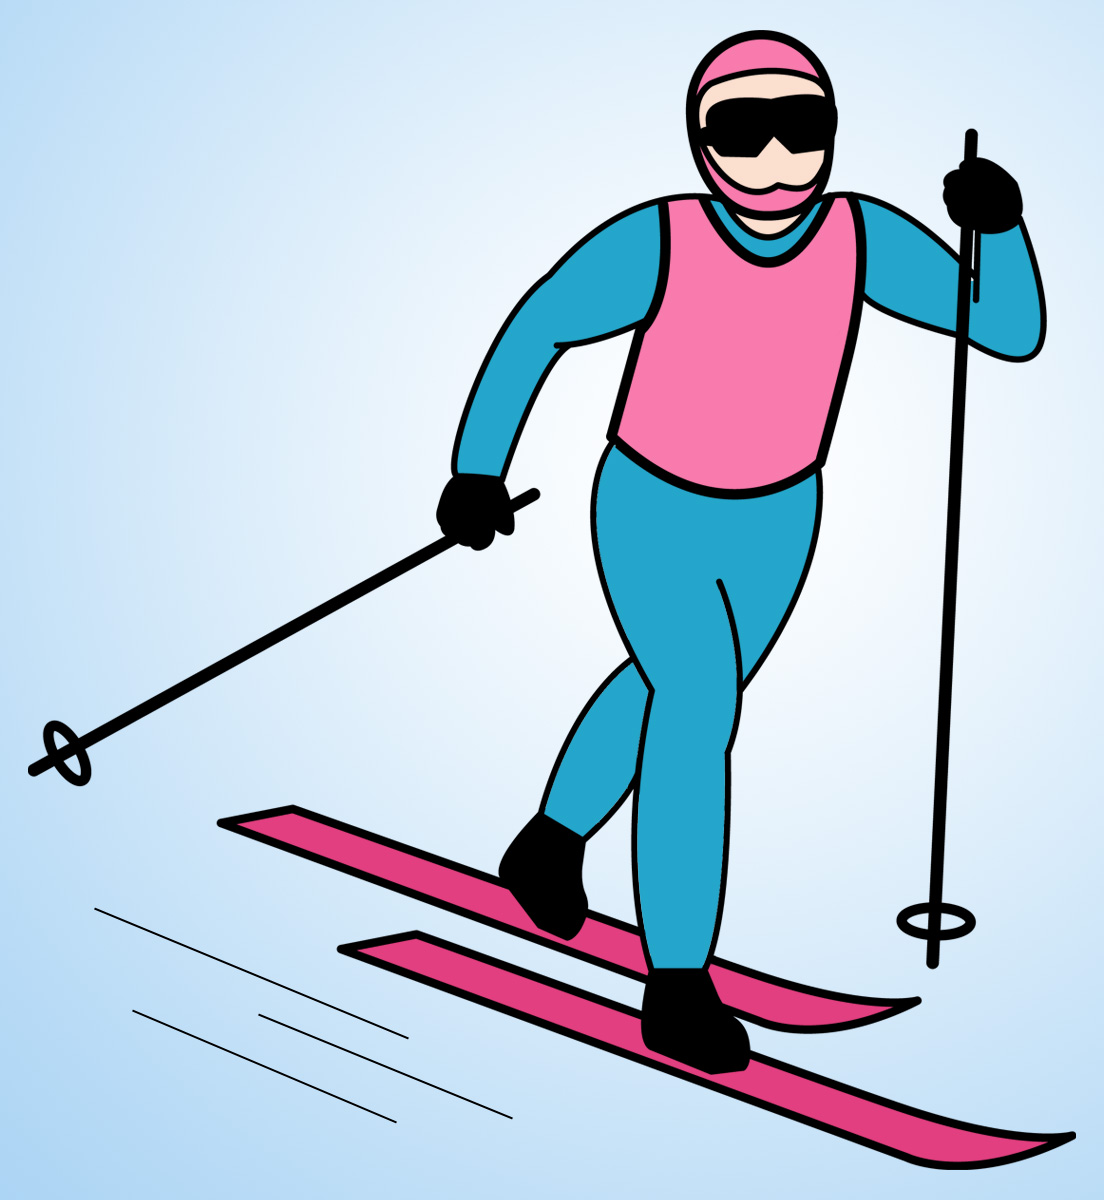 Clip Arts Related To : skiing clipart. view all Ski Cliparts). 